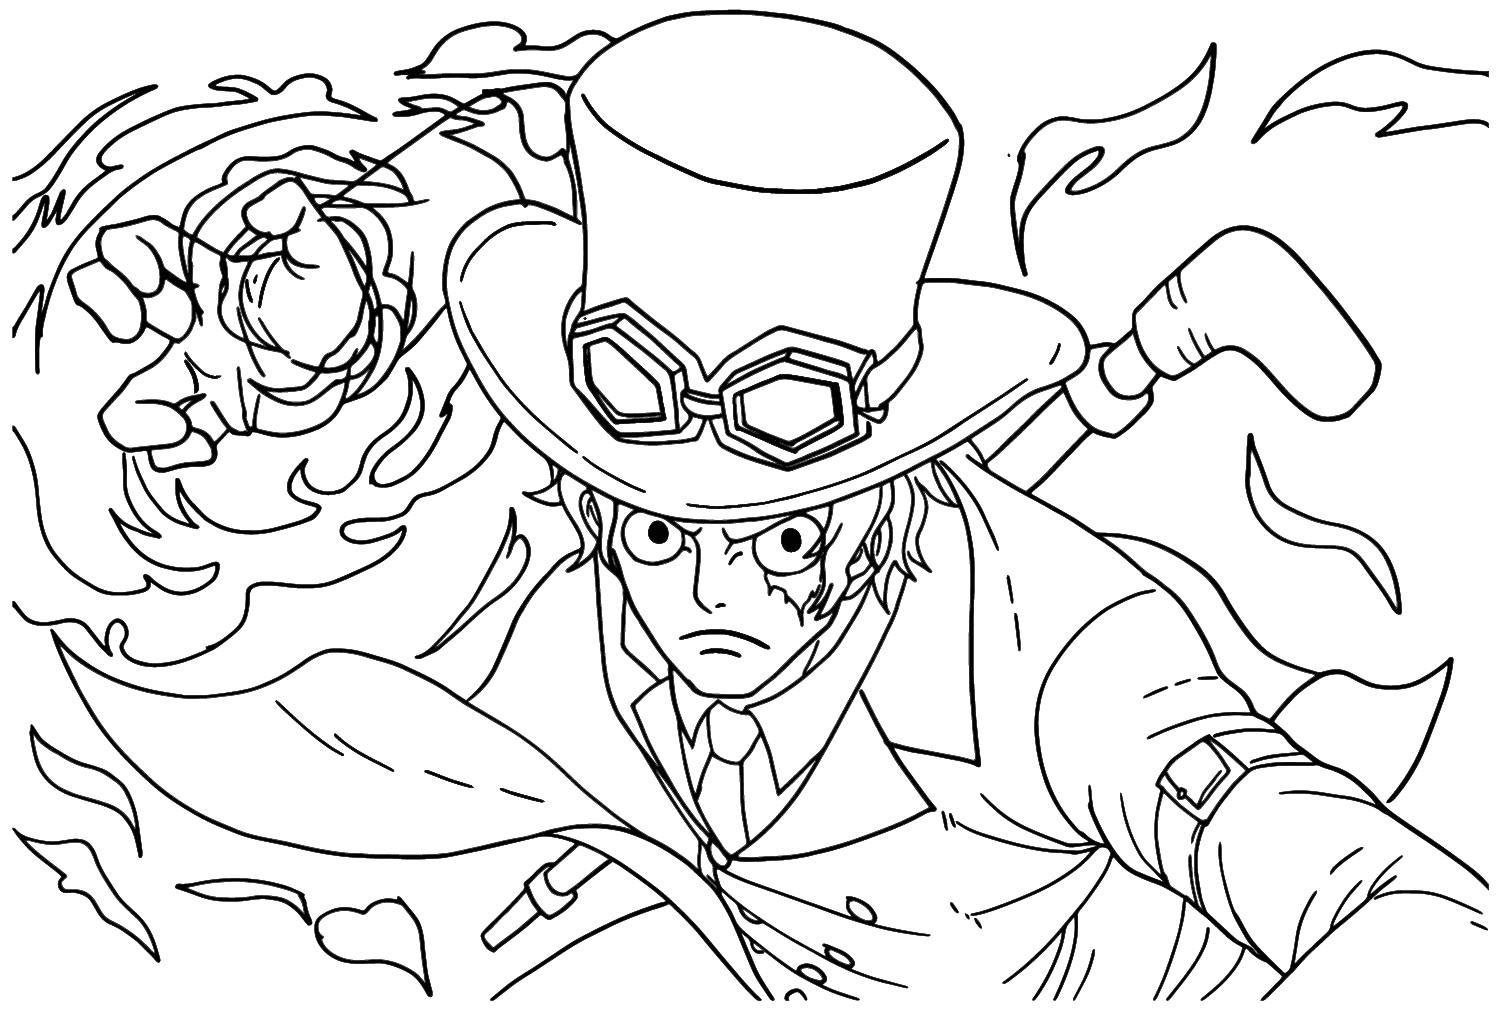 Sabo Coloring Page Free - Free Printable Coloring Pages